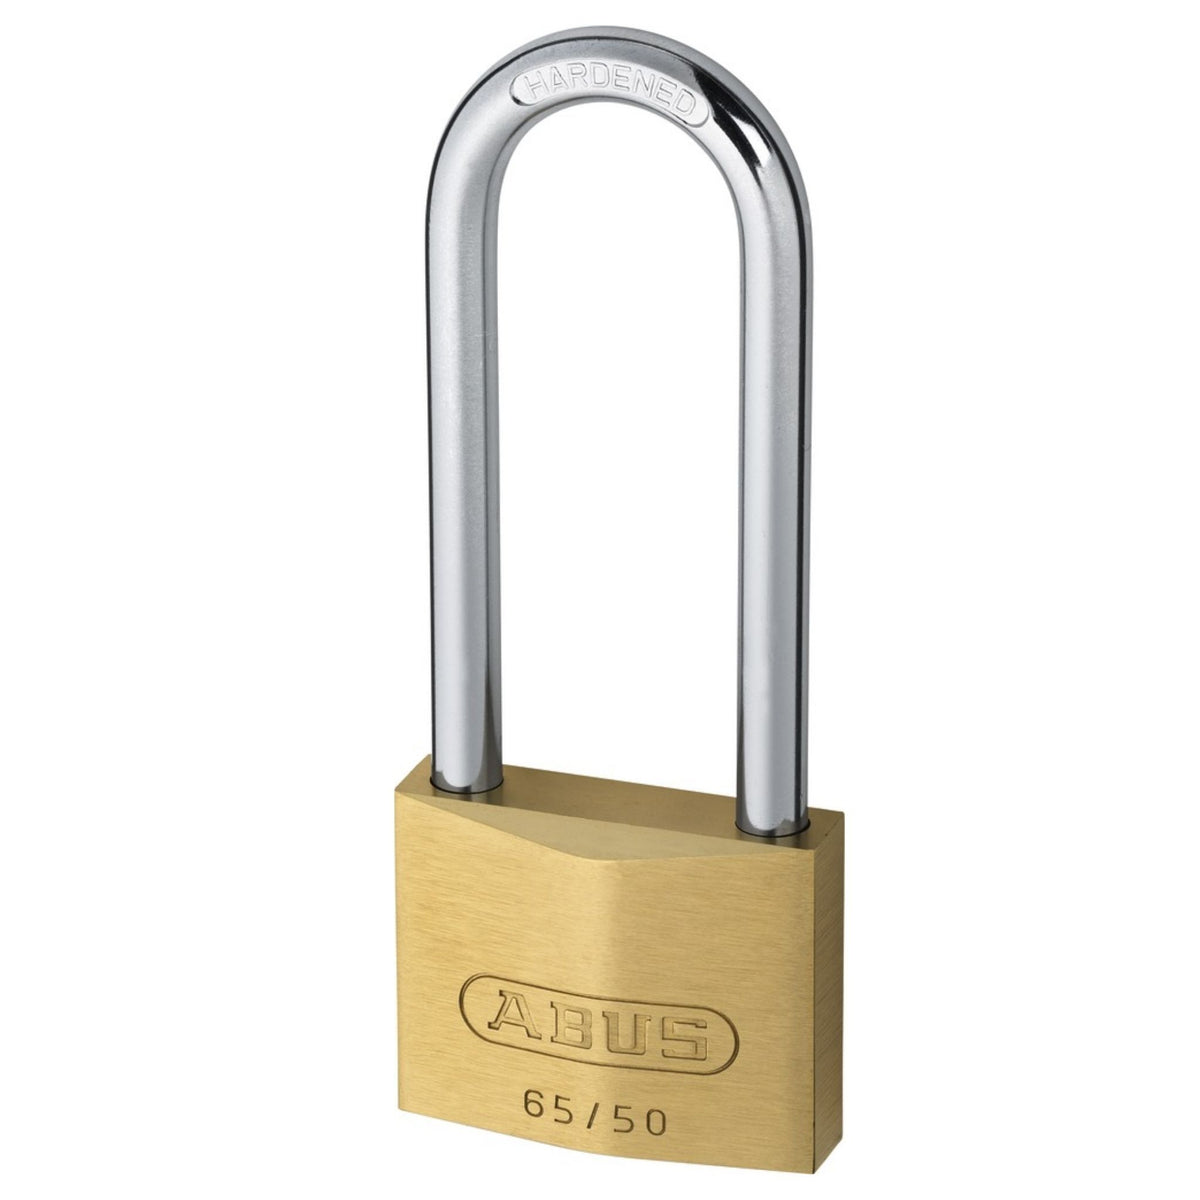 Abus 65/50HB80 KD Locks Traditional Brass Padlocks with 3-Inch Shackle - The Lock Source